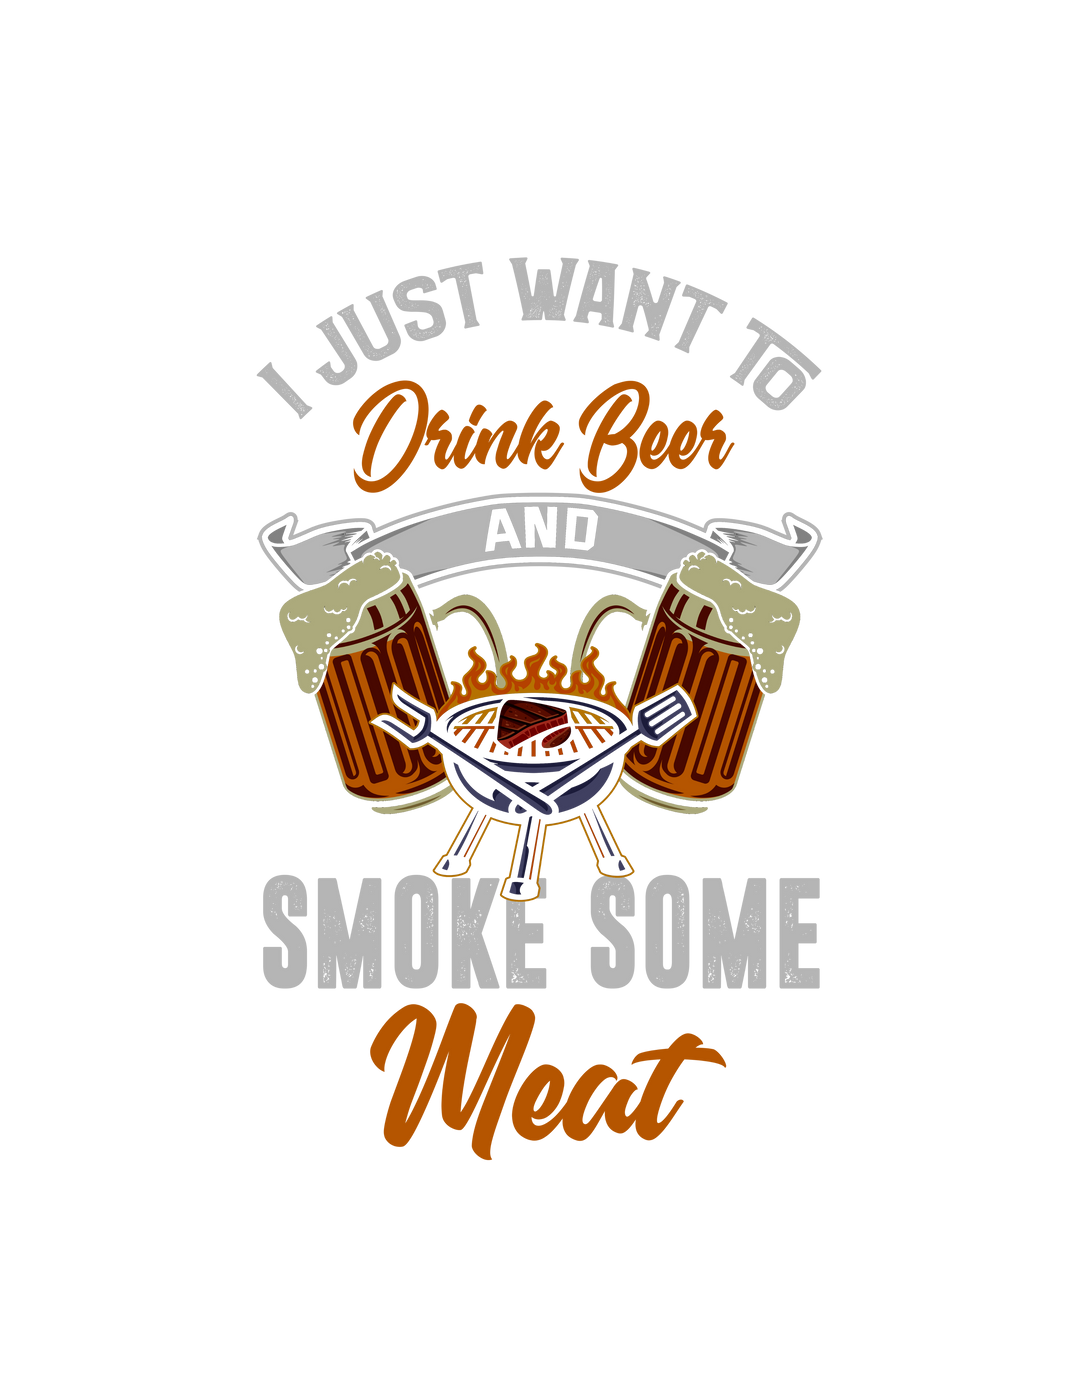 Drink Beer and Smoke Meat Tee 12550291820013390132 24 T-Shirt Worlds Worst Tees